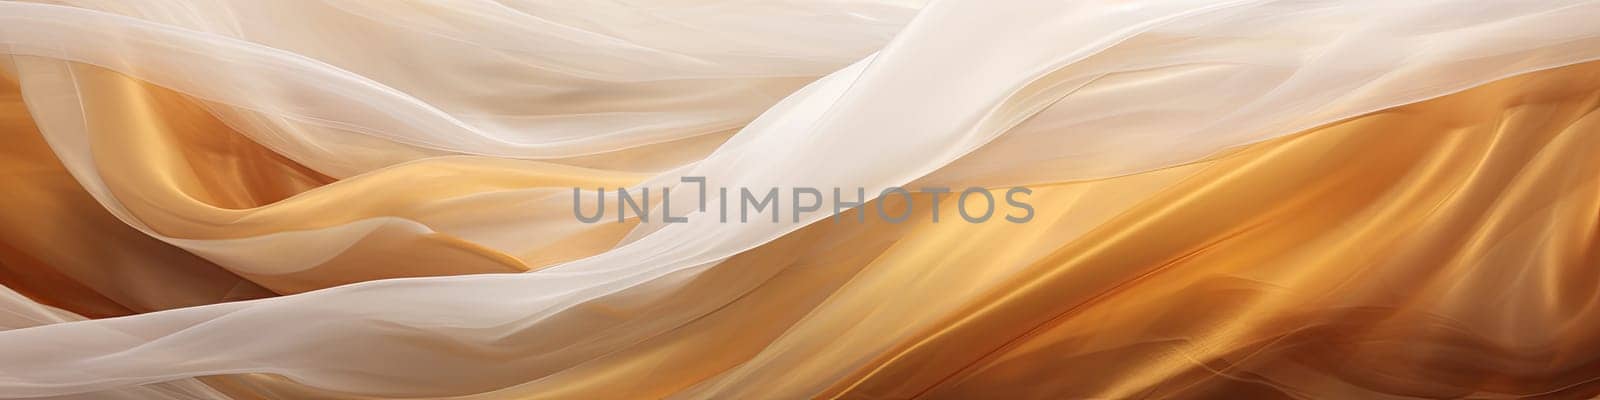 Banner of abstract white and brown, gold textile transparent fabric as background or texture